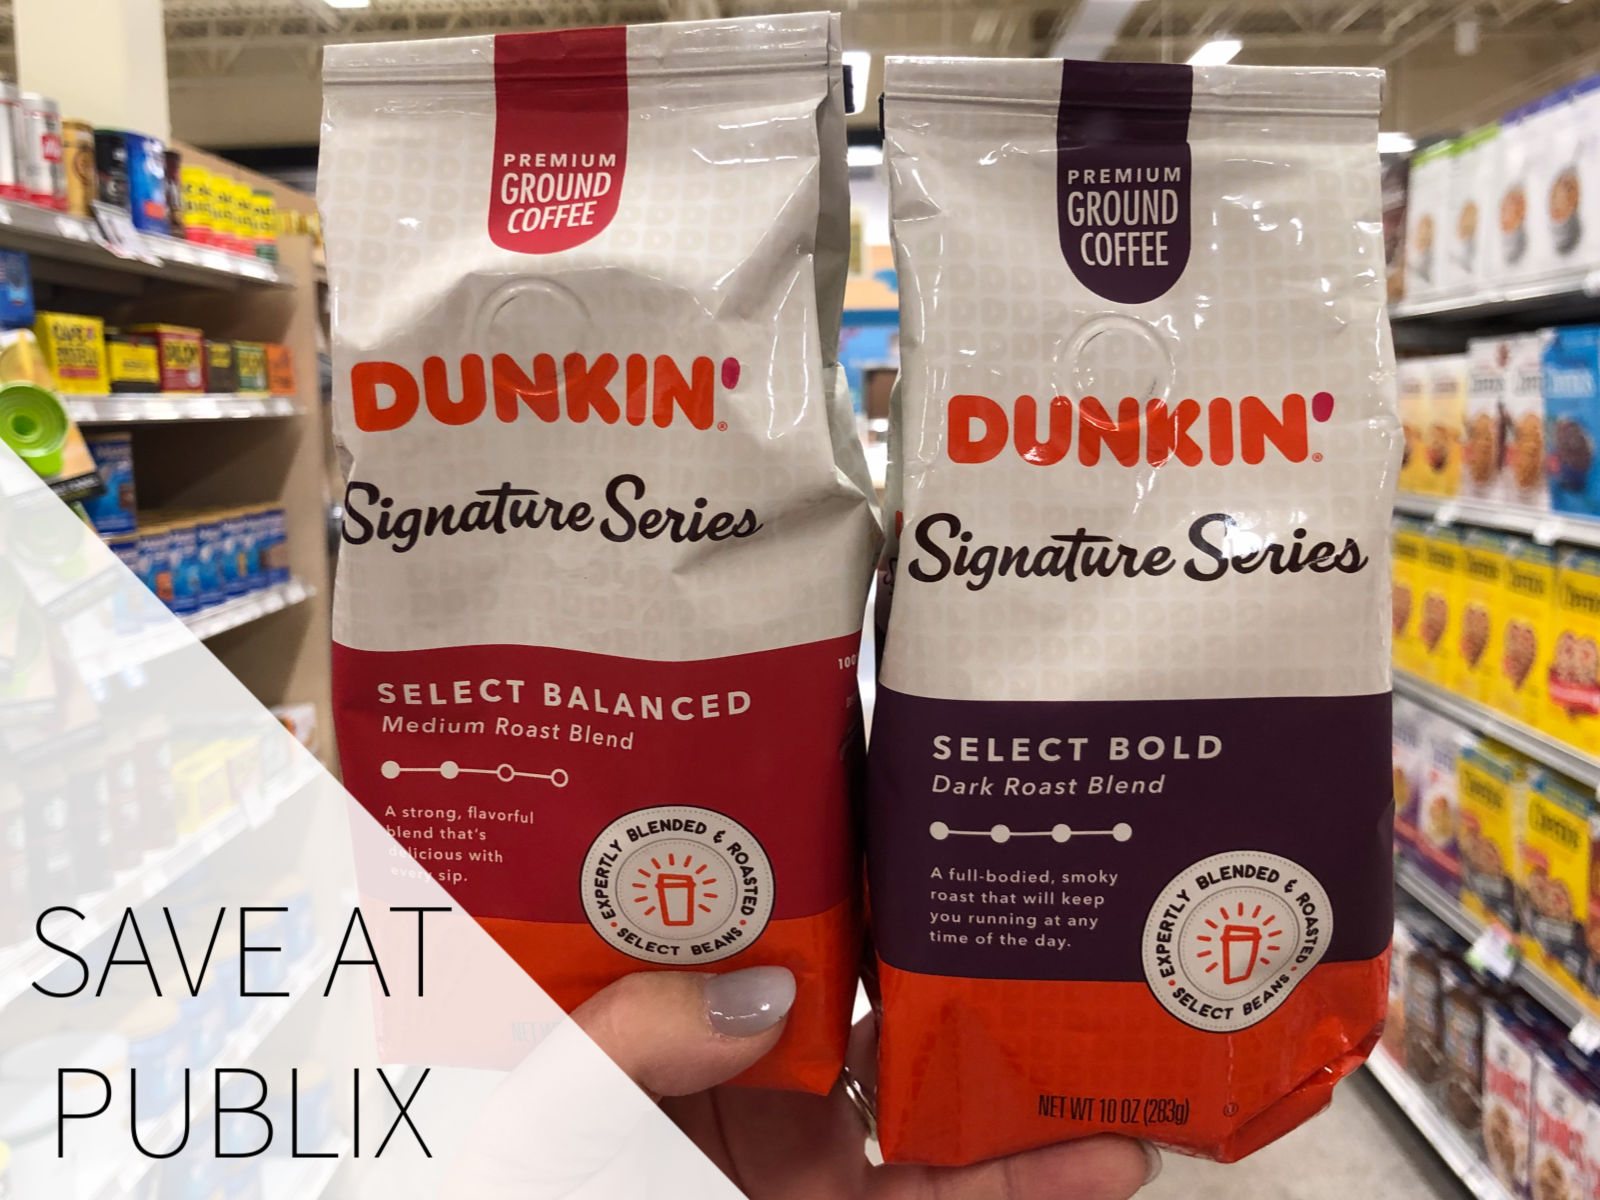 Big Savings On Dunkin' Donuts Coffee - Use The High Value Coupon To Try New Dunkin’® Signature Series on I Heart Publix